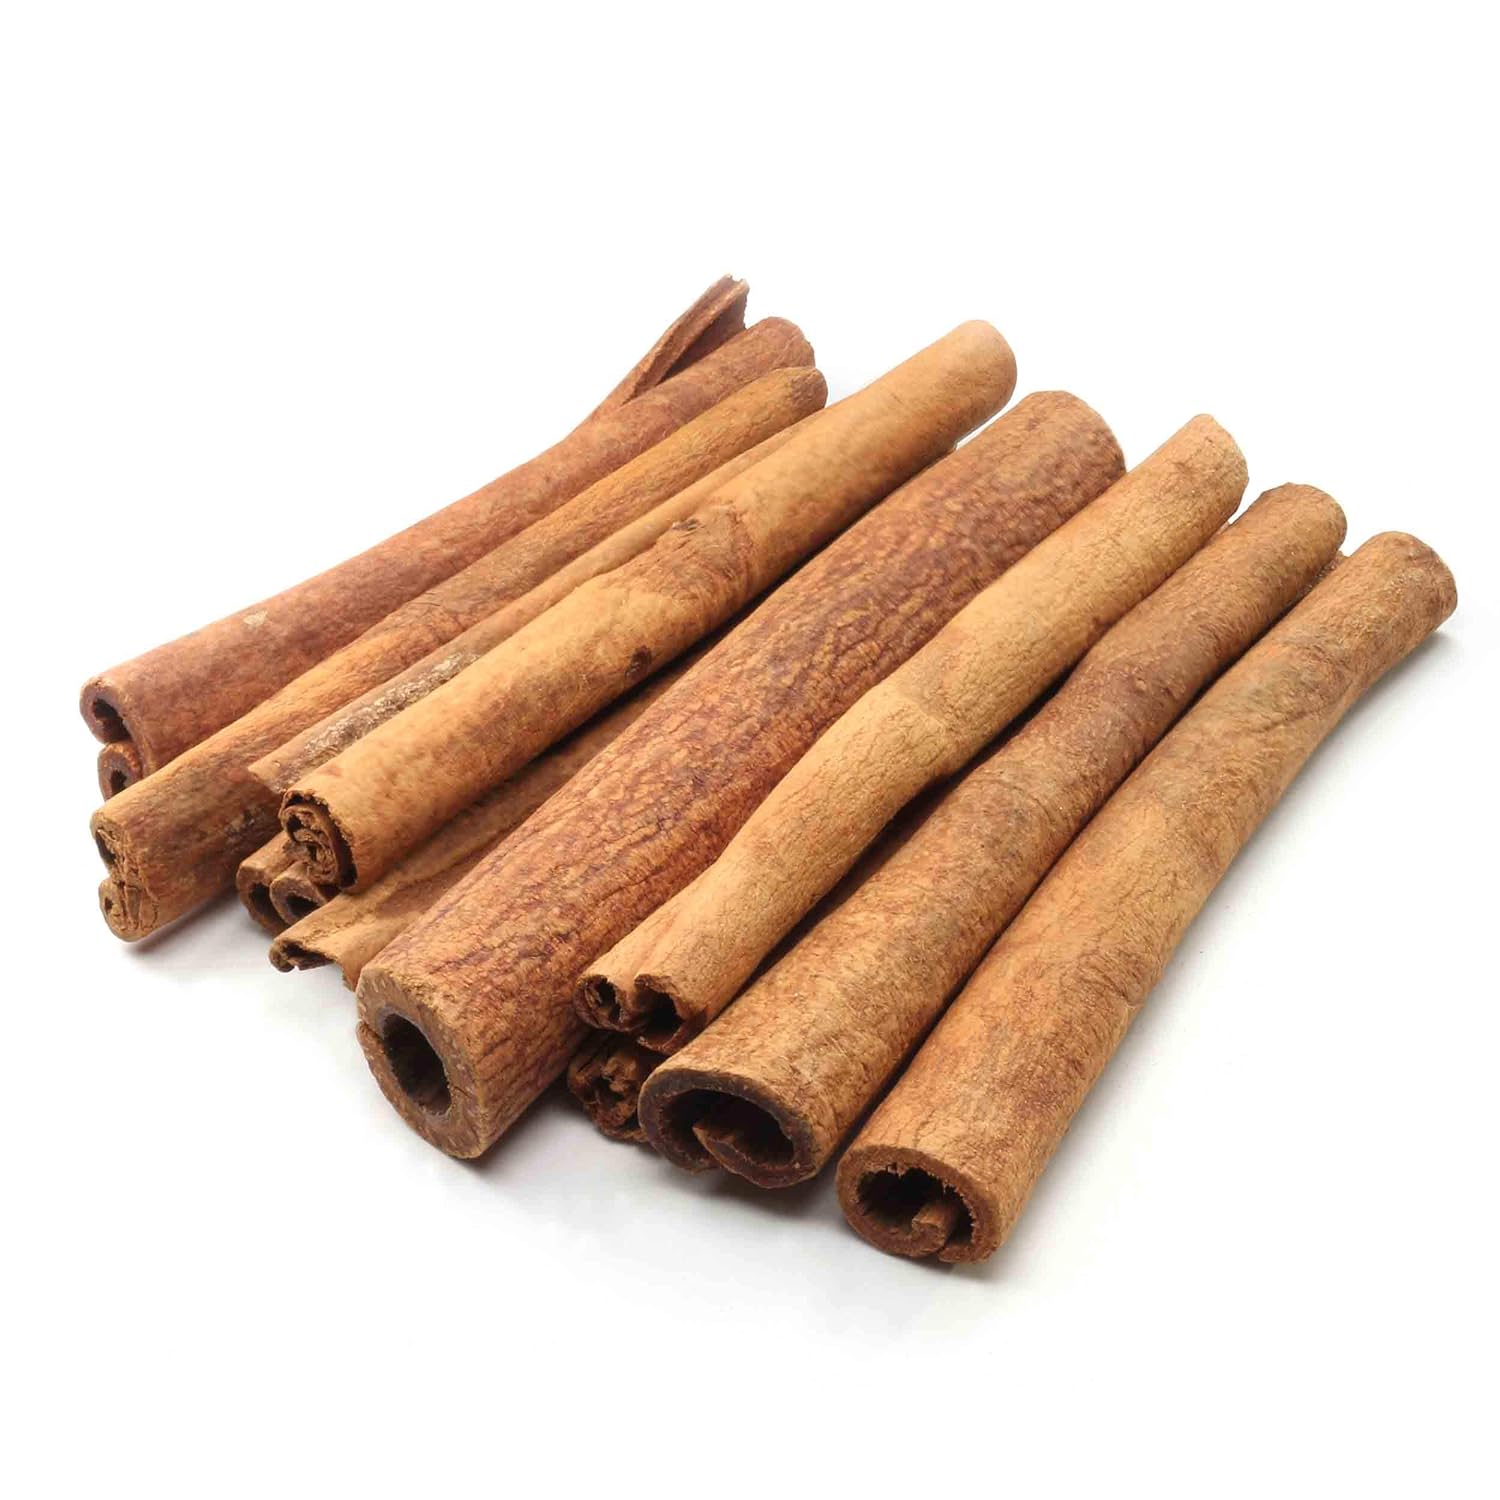 Amazon Brand - Happy Belly Cinnamon Sticks, Whole, 1.5 ounce (Pack of 1)